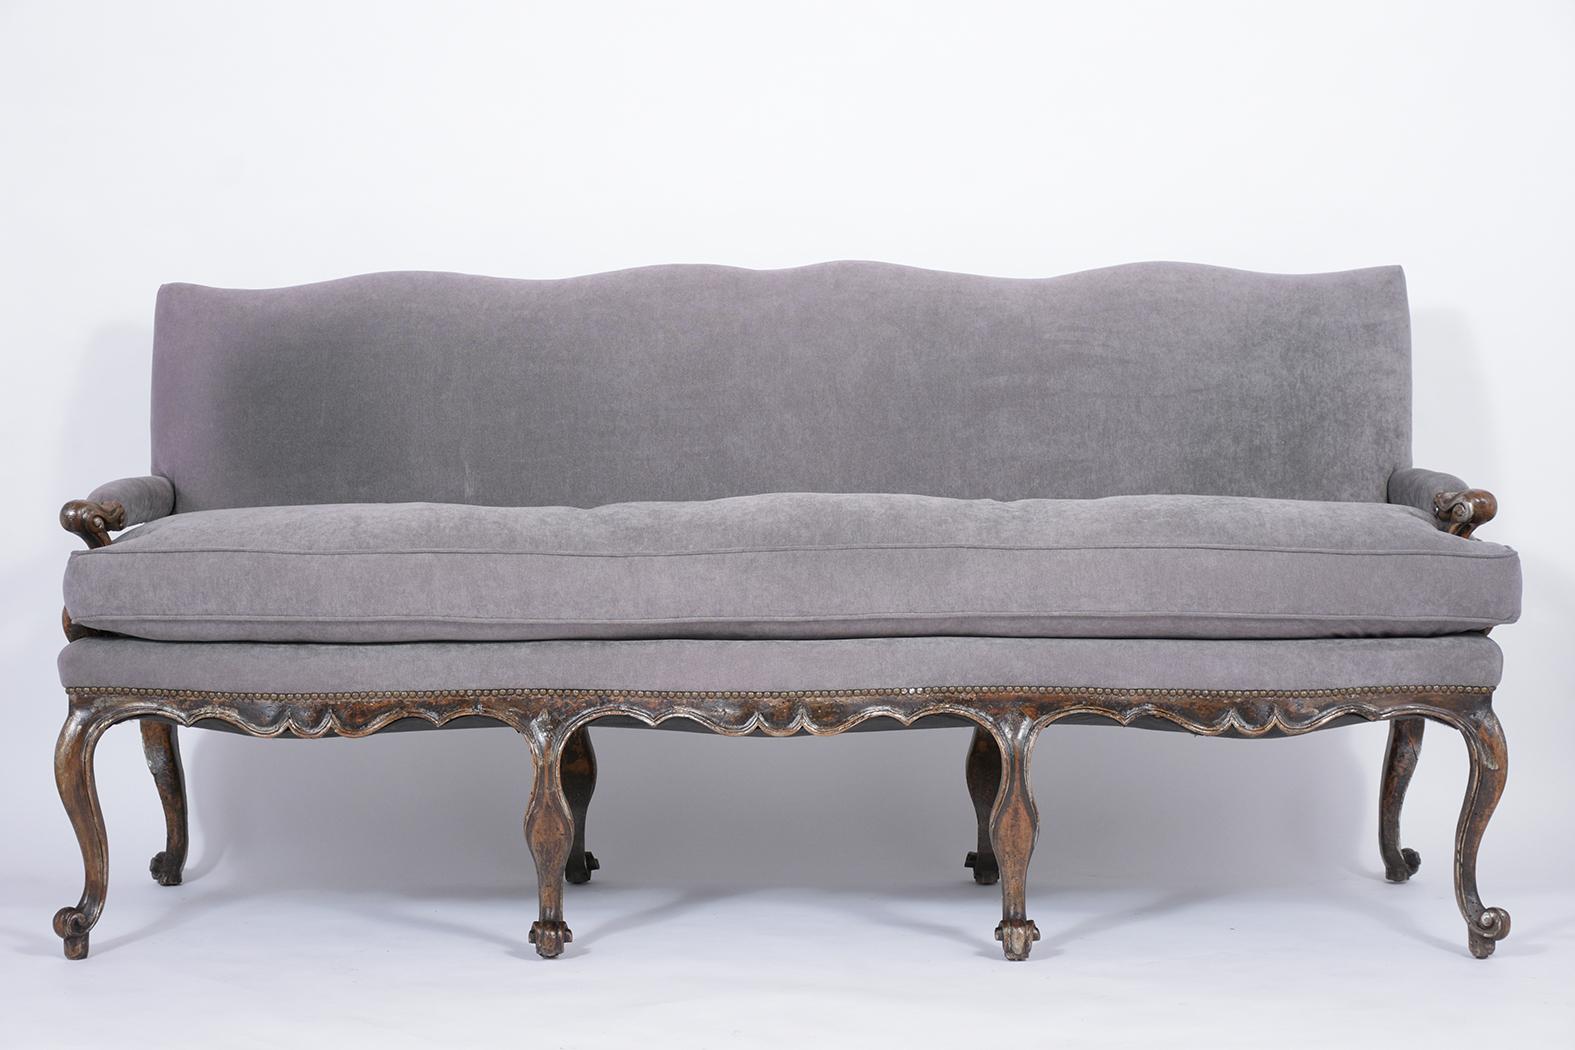 An extraordinary 18th-century Louis XV walnut sofa made out of walnut wood with hand-carved details throughout and features the original walnut color with silver-gilt details and a beautiful patina finish. The sofa has been professionally